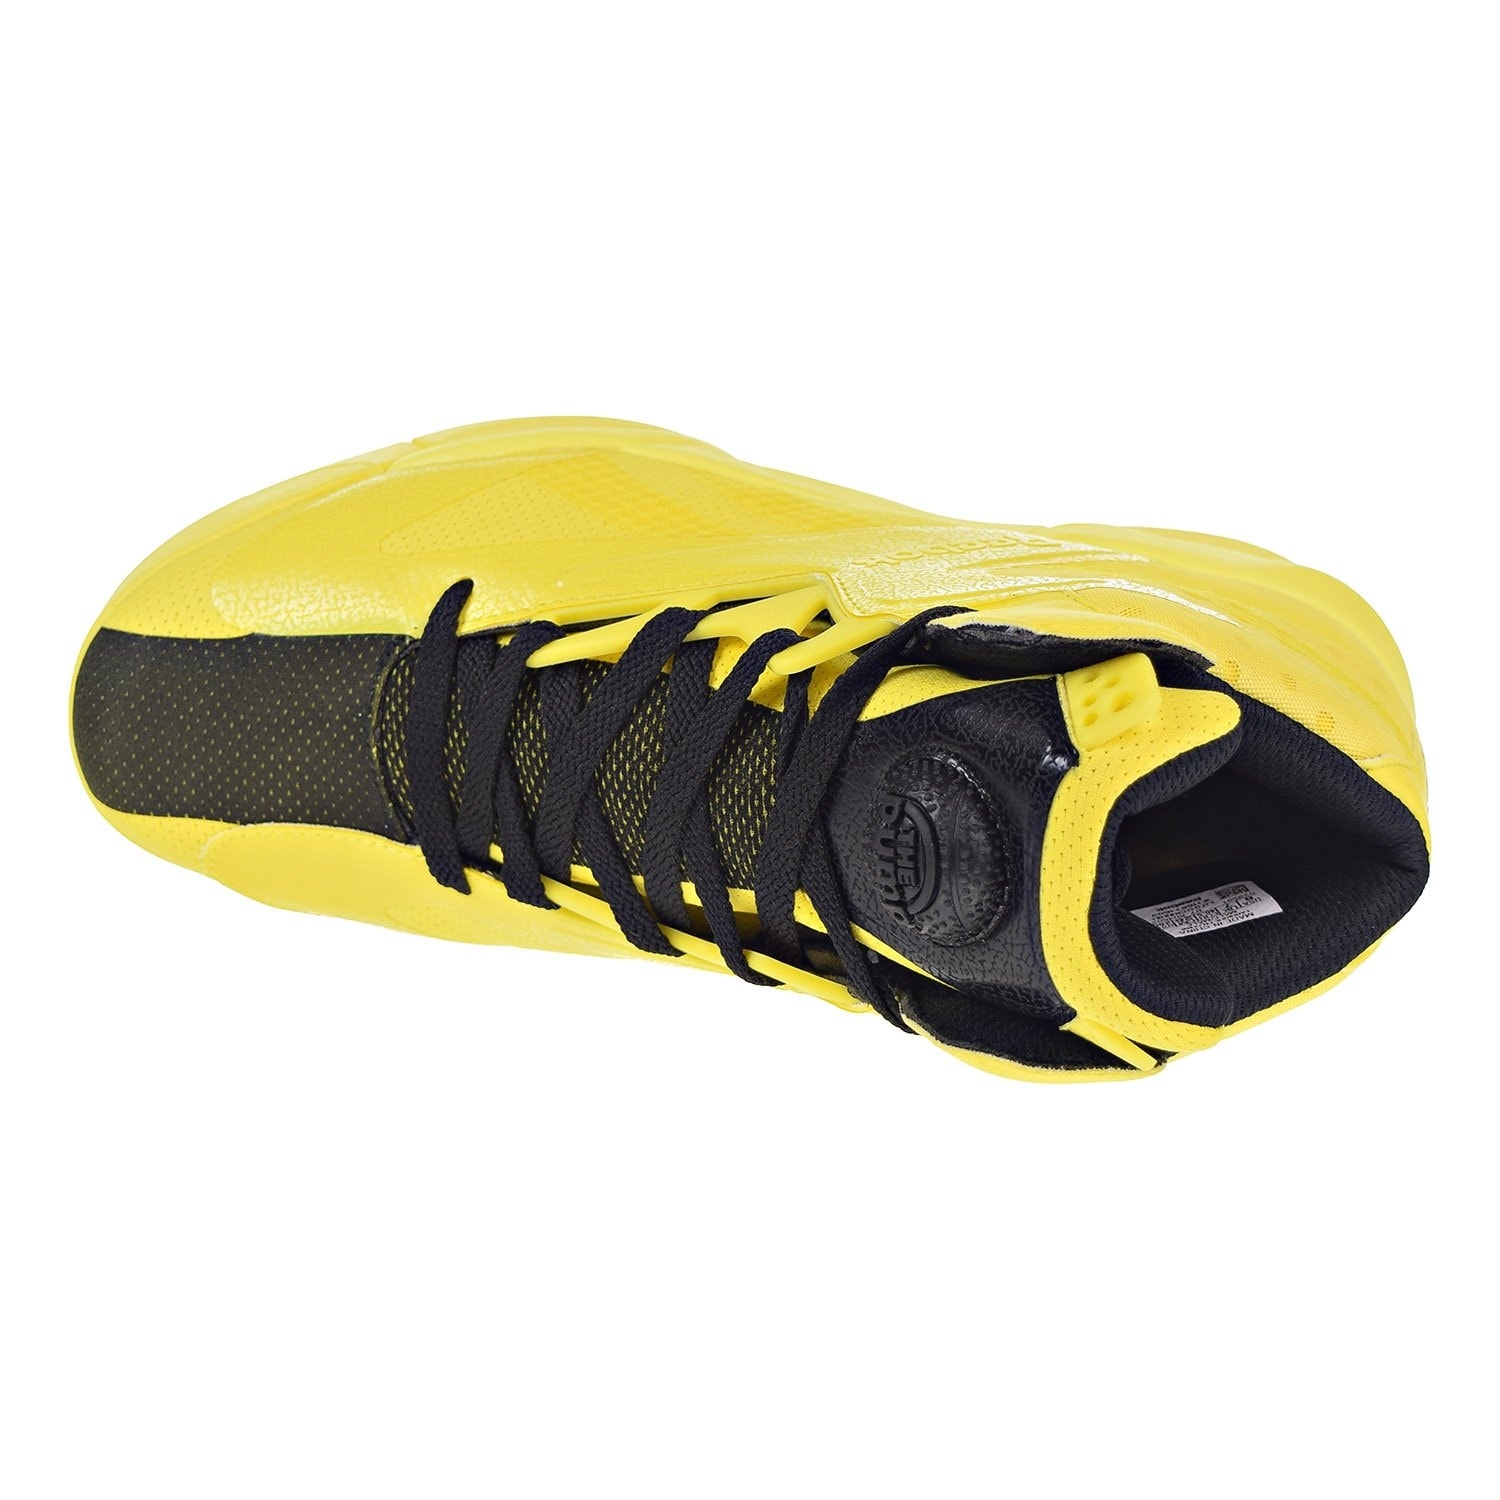 shaq shoes with co2 pump